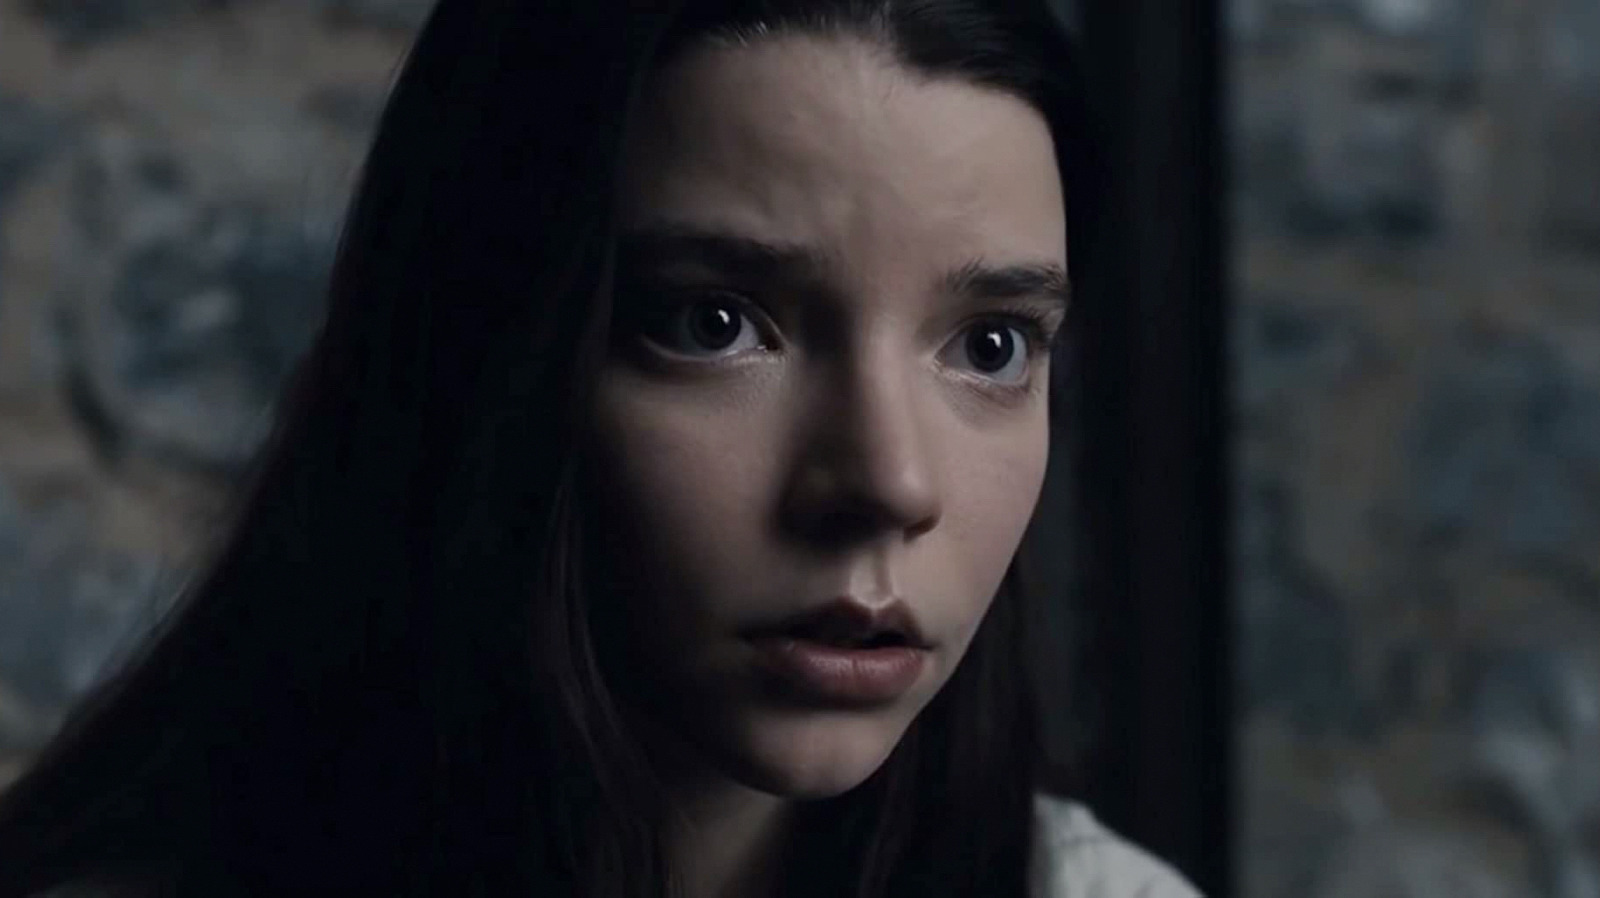 What movies has Anya Taylor-Joy been in?